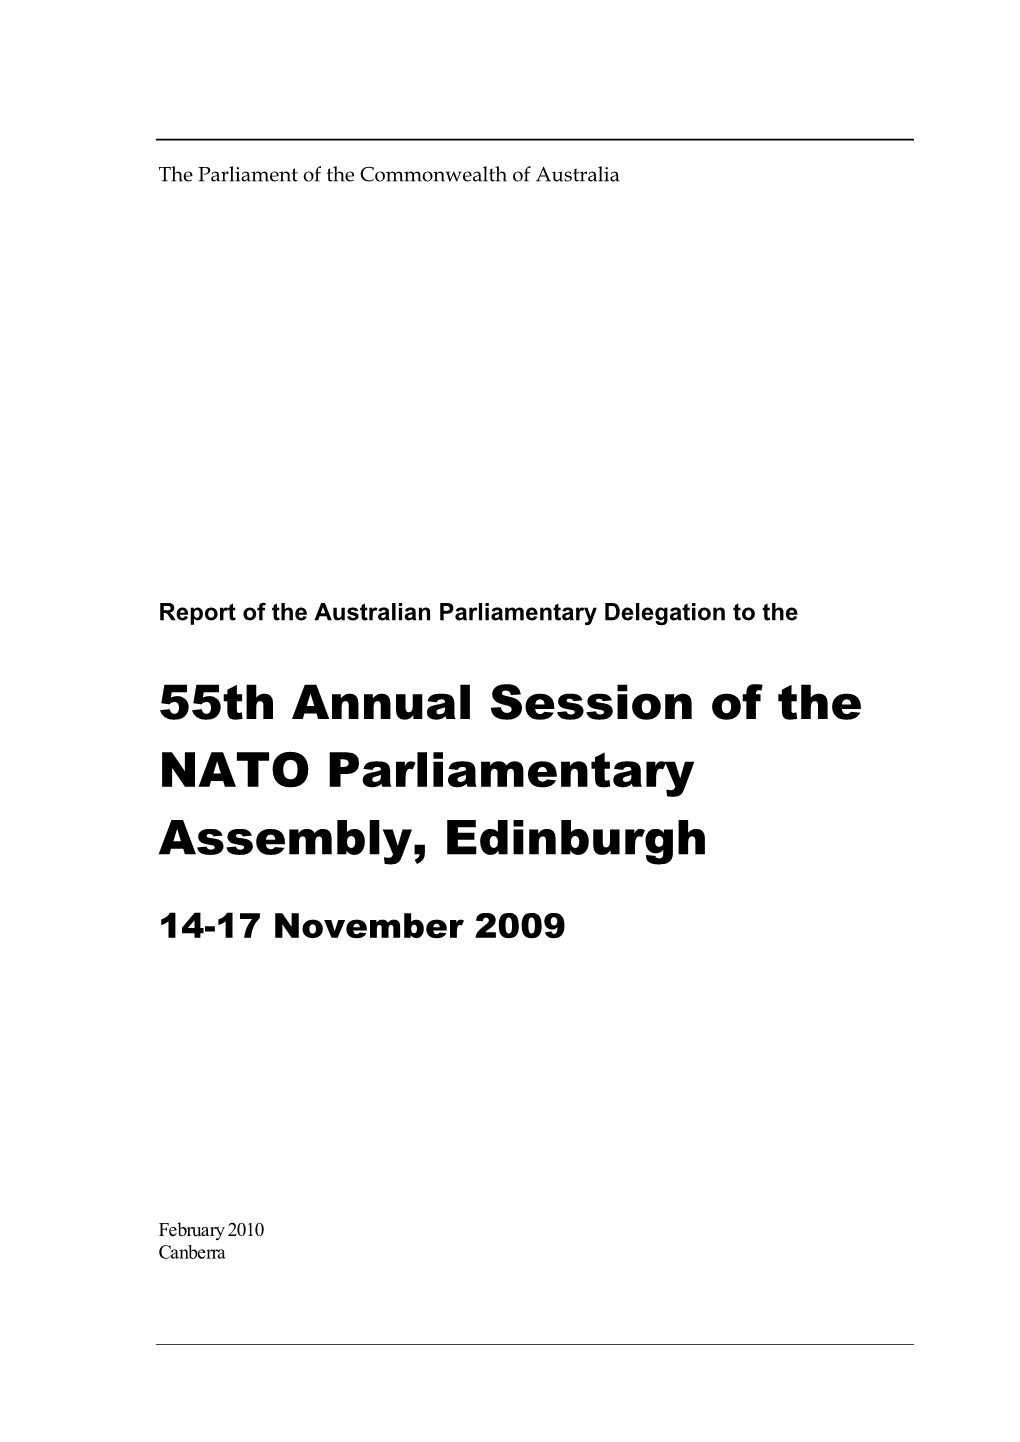 55Th Annual Session of the NATO Parliamentary Assembly, Edinburgh